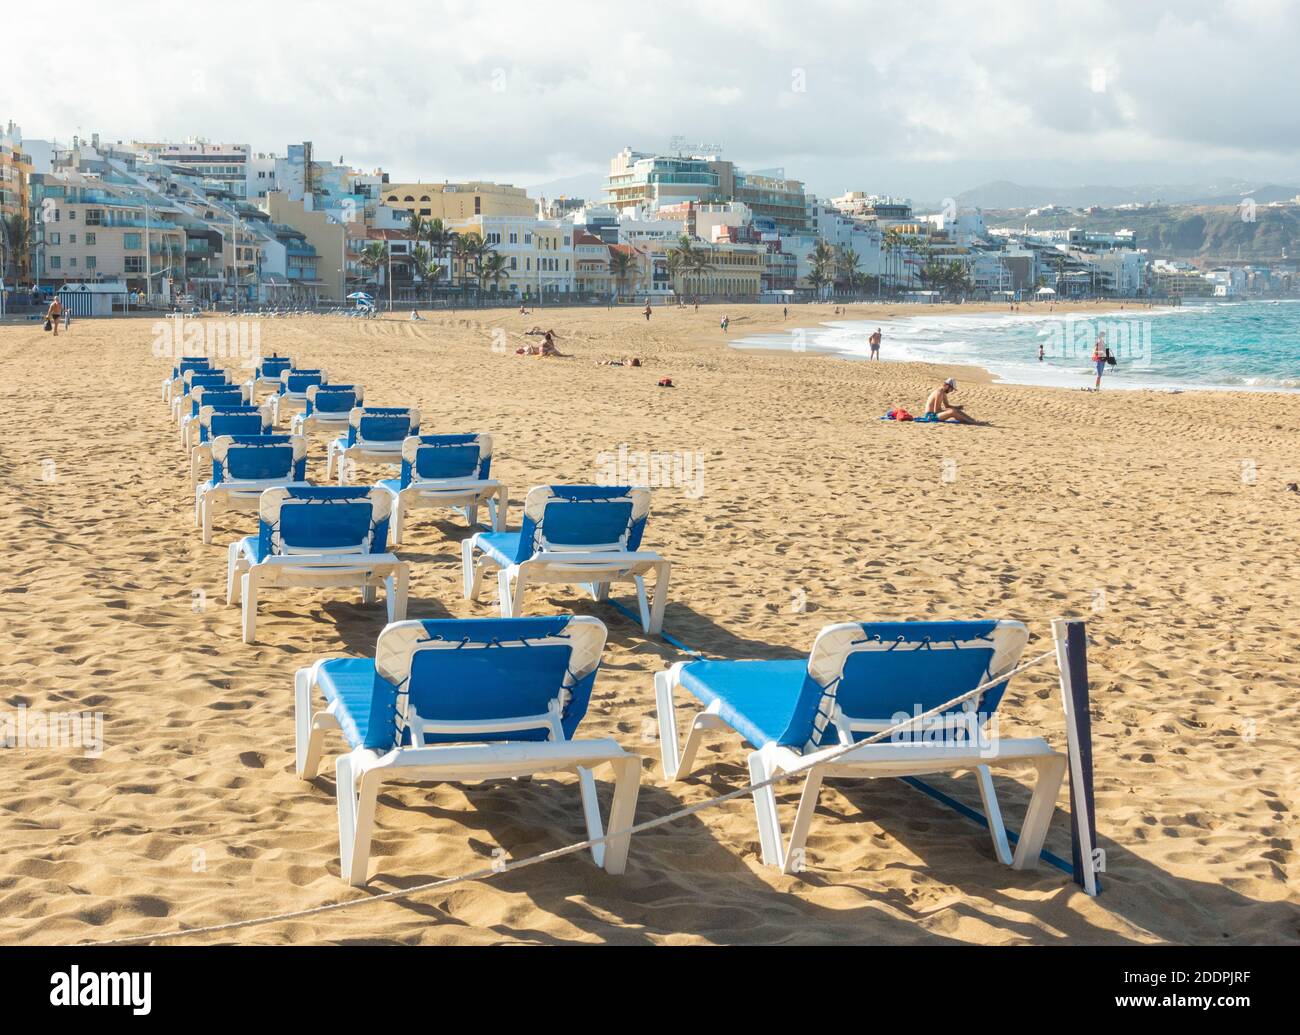 Las Palmas, Gran Canaria, Canary Islands, Spain. 25th November, 2020. Very  few tourists on a quiet city beach in Las Palmas on Gran Canaria. From 23rd  November, people arriving on The Canary